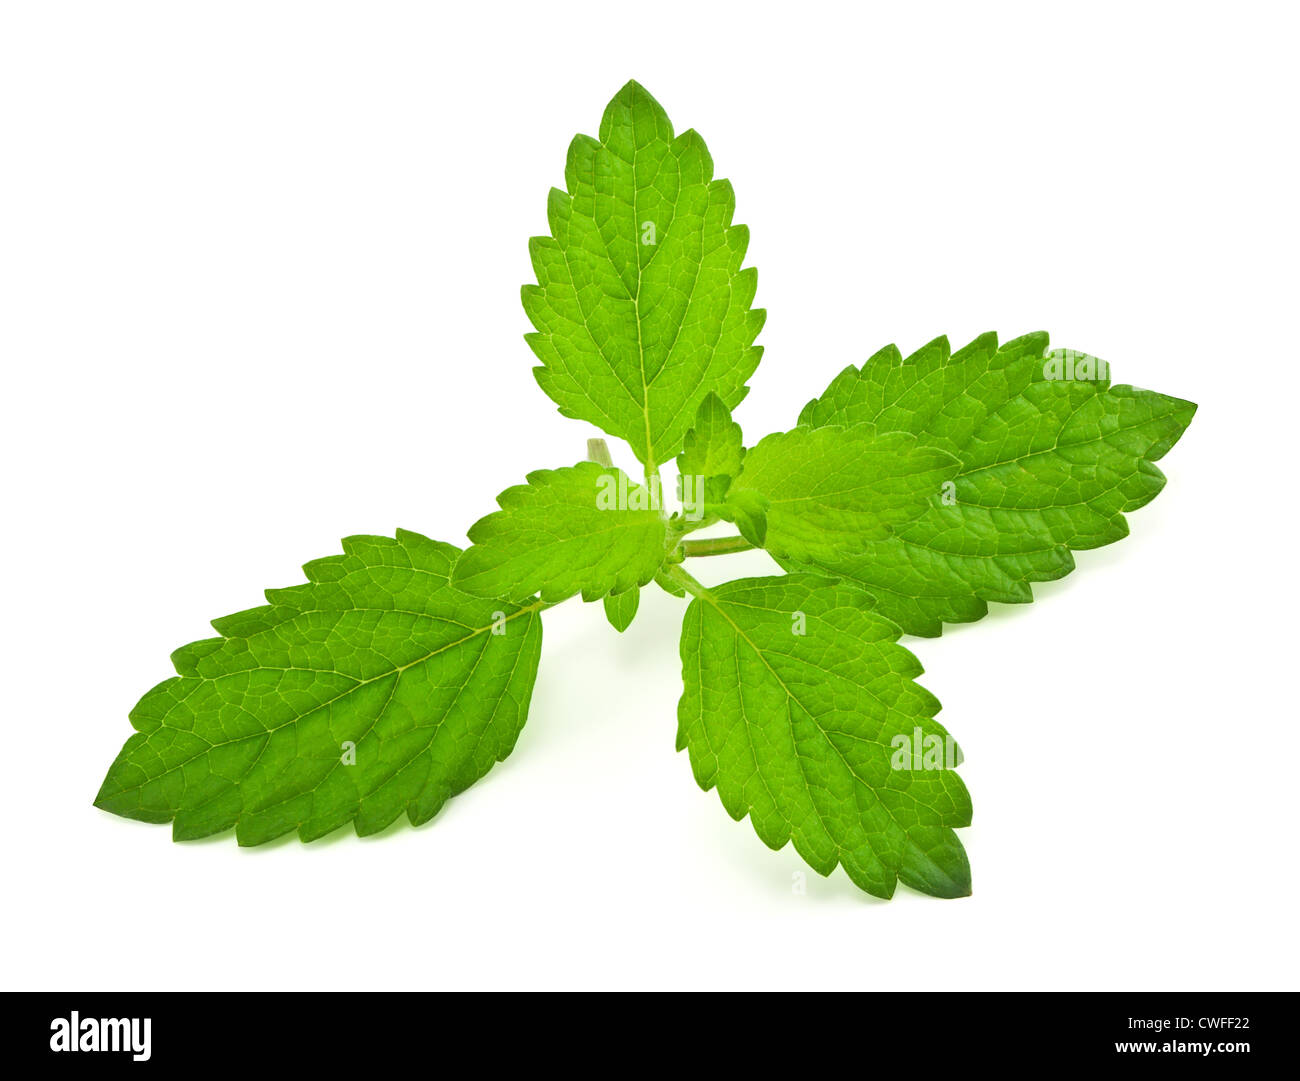 Pepper mint leaves, on white background Stock Photo